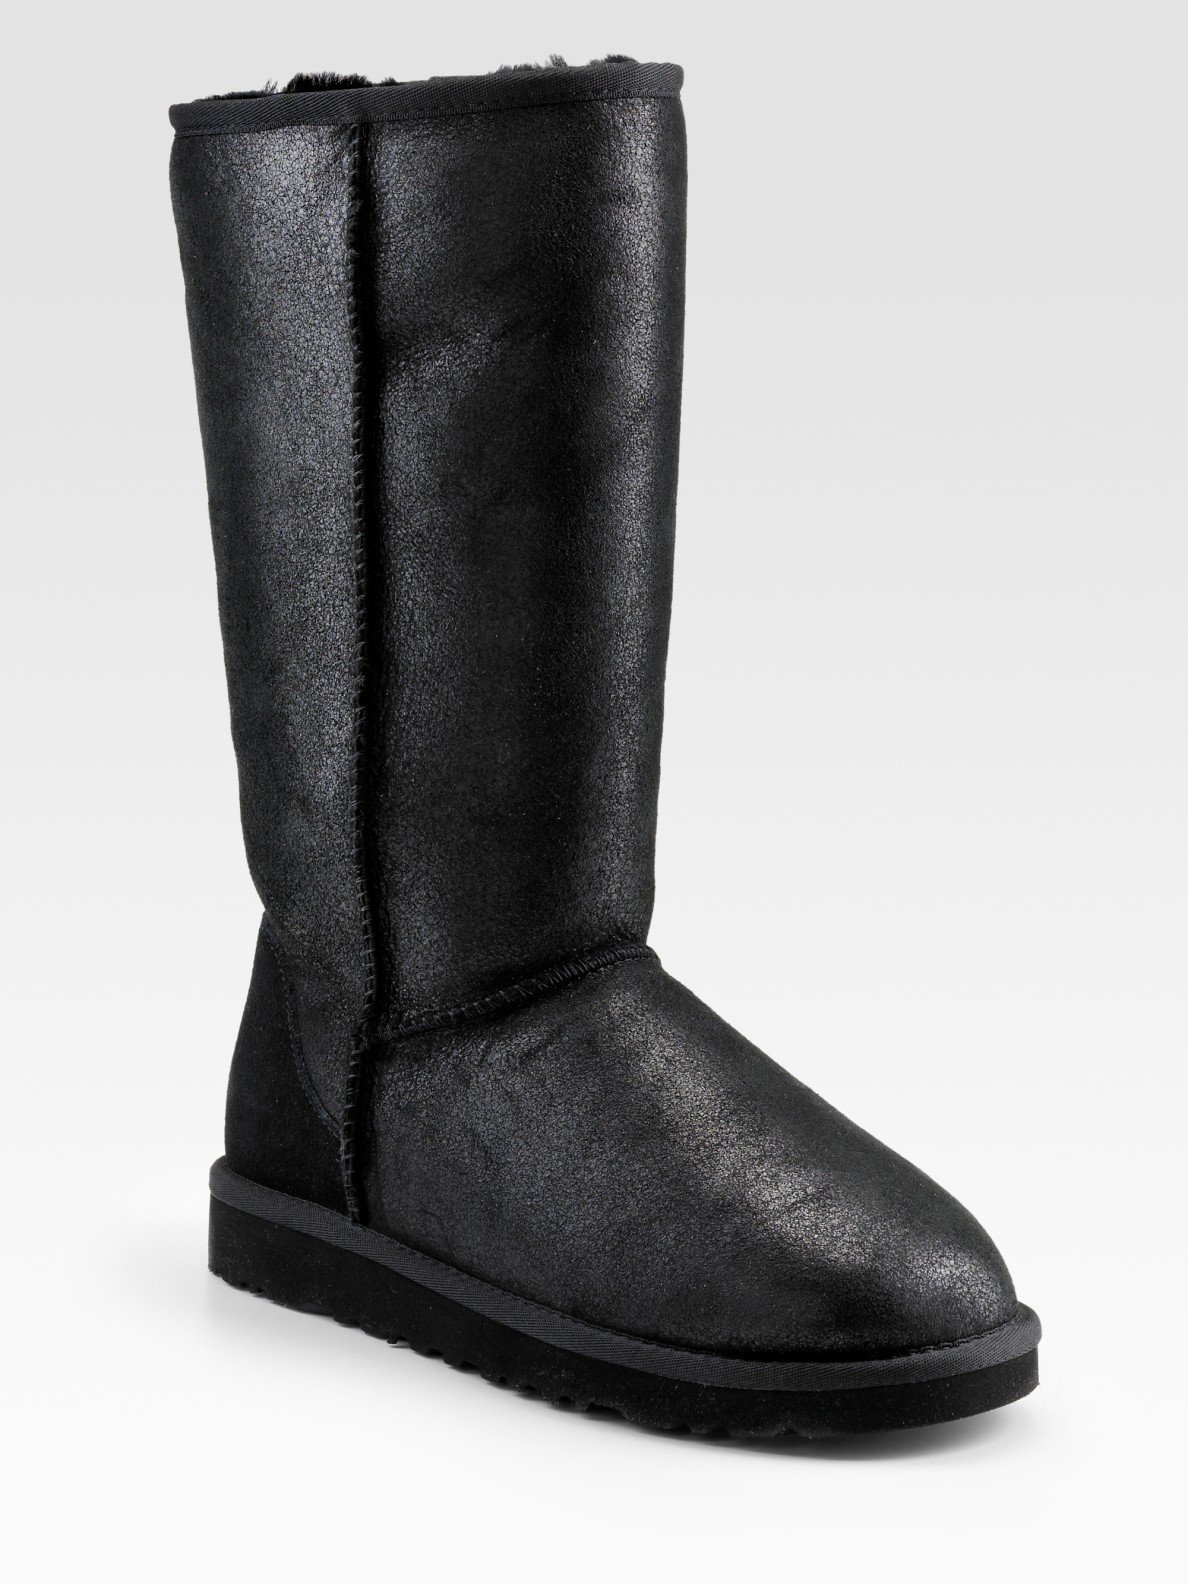 long leather ugg boots